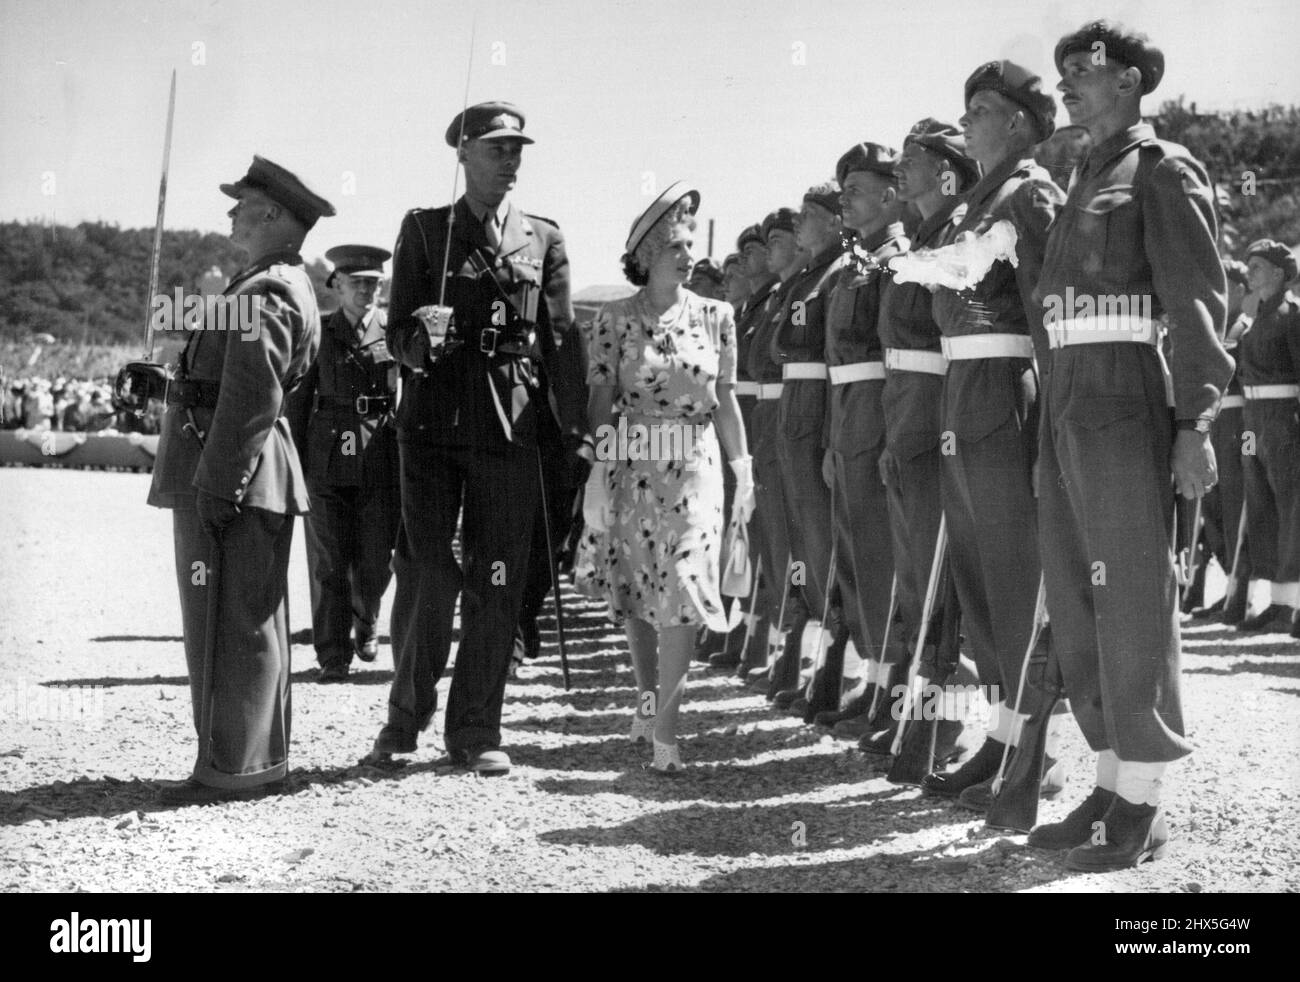 Princess Elizabeth Opens New South African Graving Dock -- Princess Elizabeth inspecting a guard of honor drawn from the Railways and Harbors Brigade. Princess Elizabeth performed her first public engagement on her own during the Royal family's tour of South Africa when she opened the new 'Princess Elizabeth' graving dock for ships up to 17,000 tons on the Buffalo River at East London by breaking a signal flag authorizing the South African Naval Forces Frigate 'Transvaal' to enter the dock. During the ceremony, the Princess received a gift of five large diamonds (estimated to be worth Stock Photo